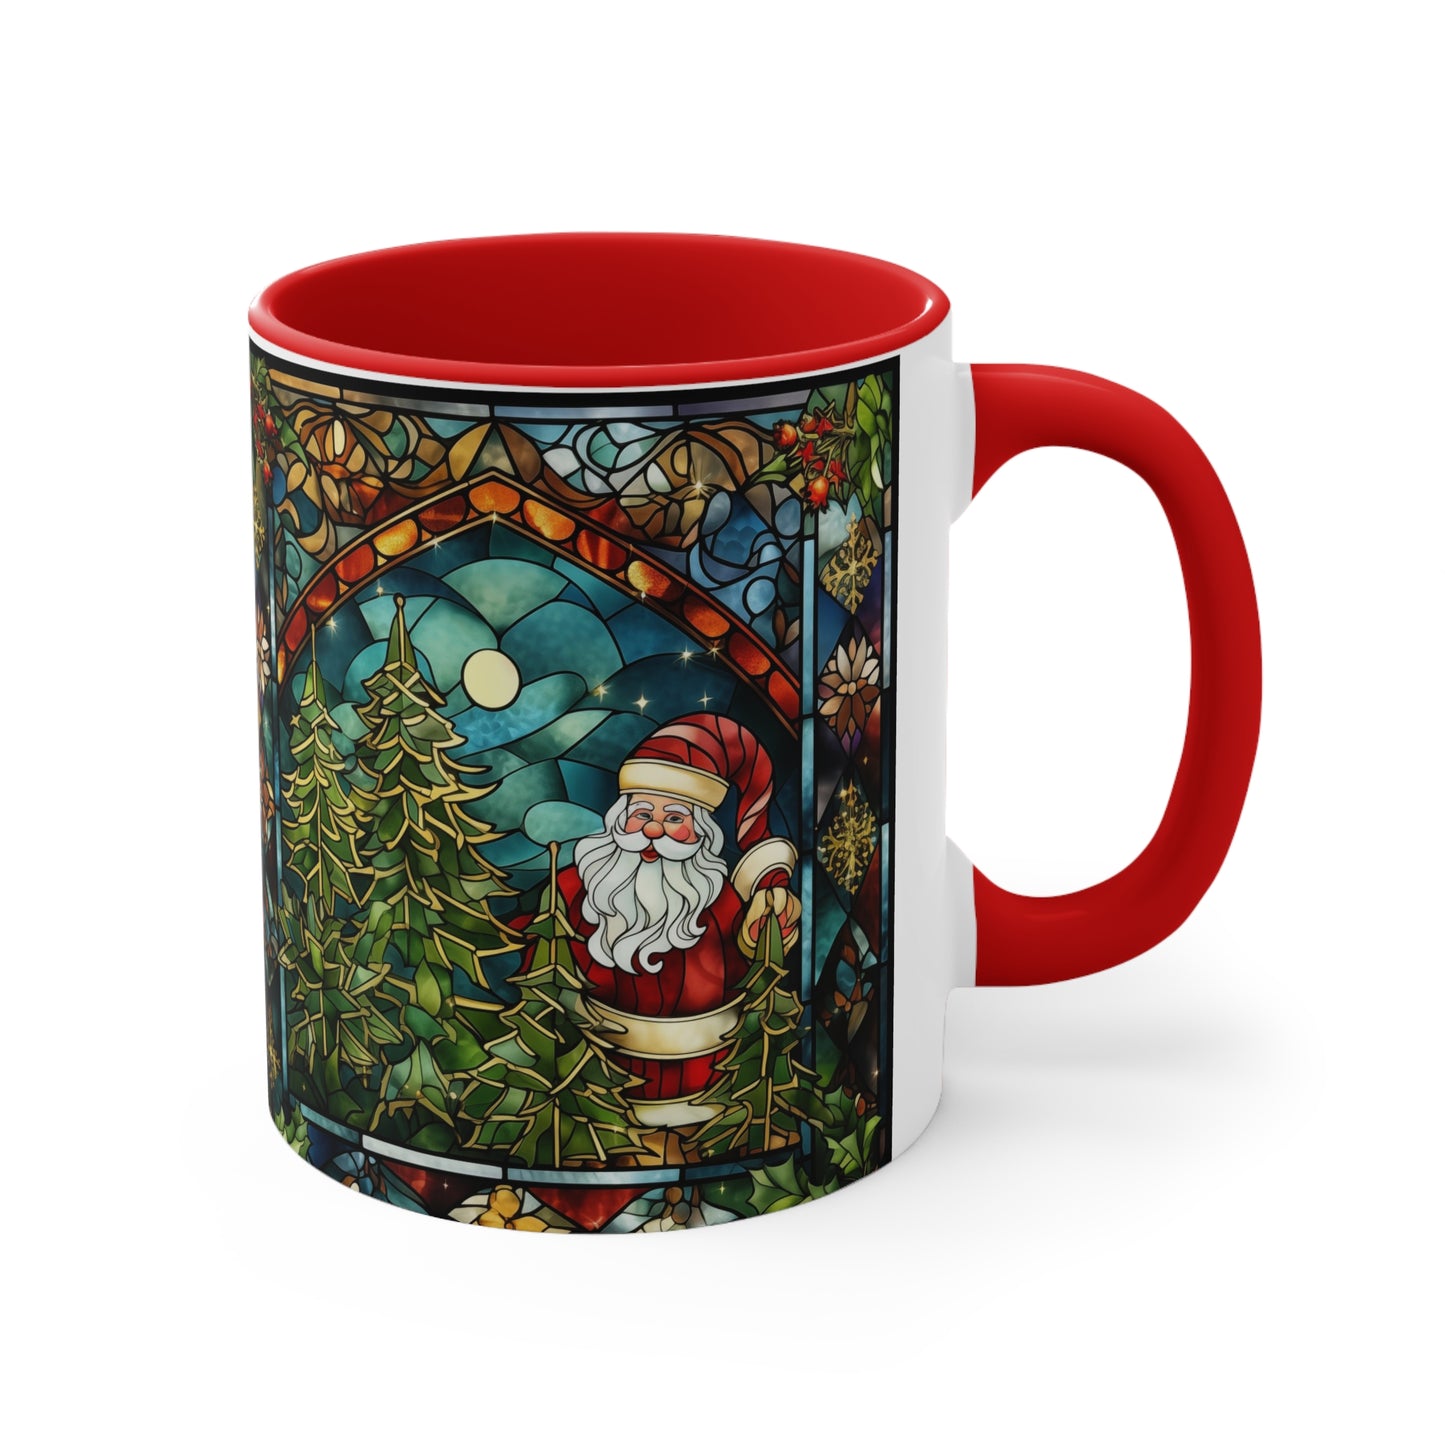 Santa Clause in the moonlight with Christmas Trees | Ceramic Mug